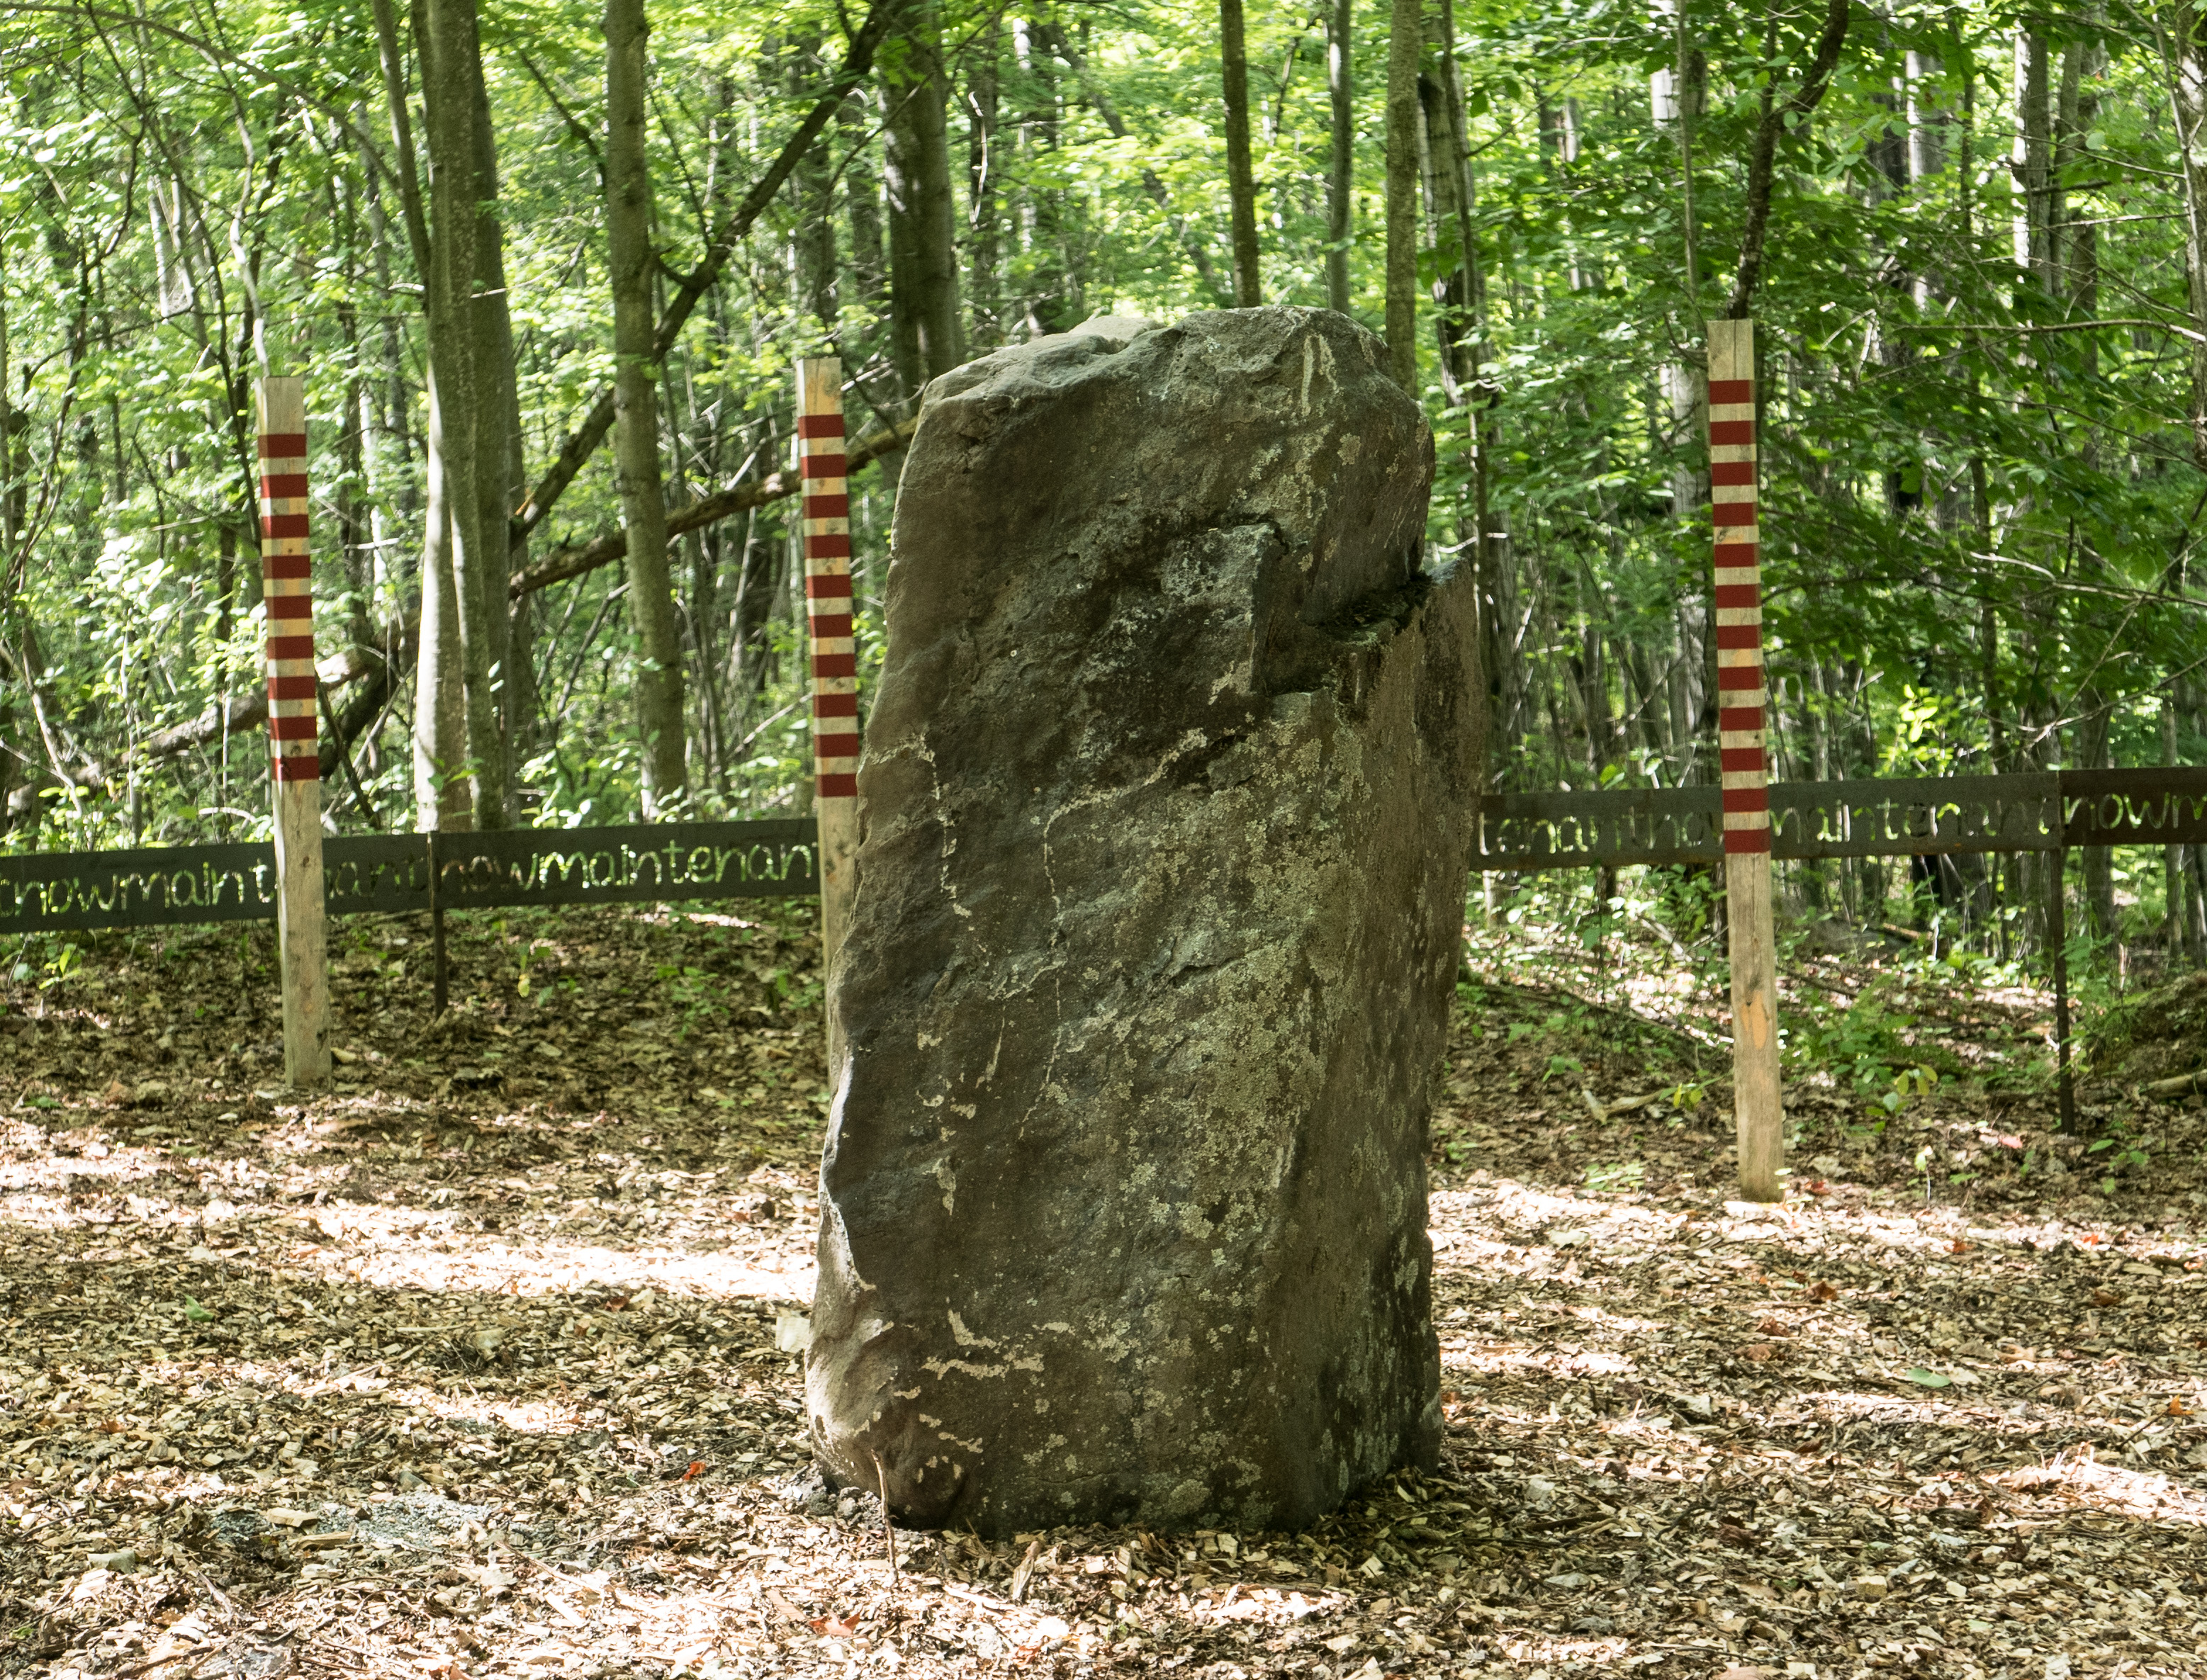 The stone stands in the middle of the clearing and its shadow marks the hour on the painted posts.